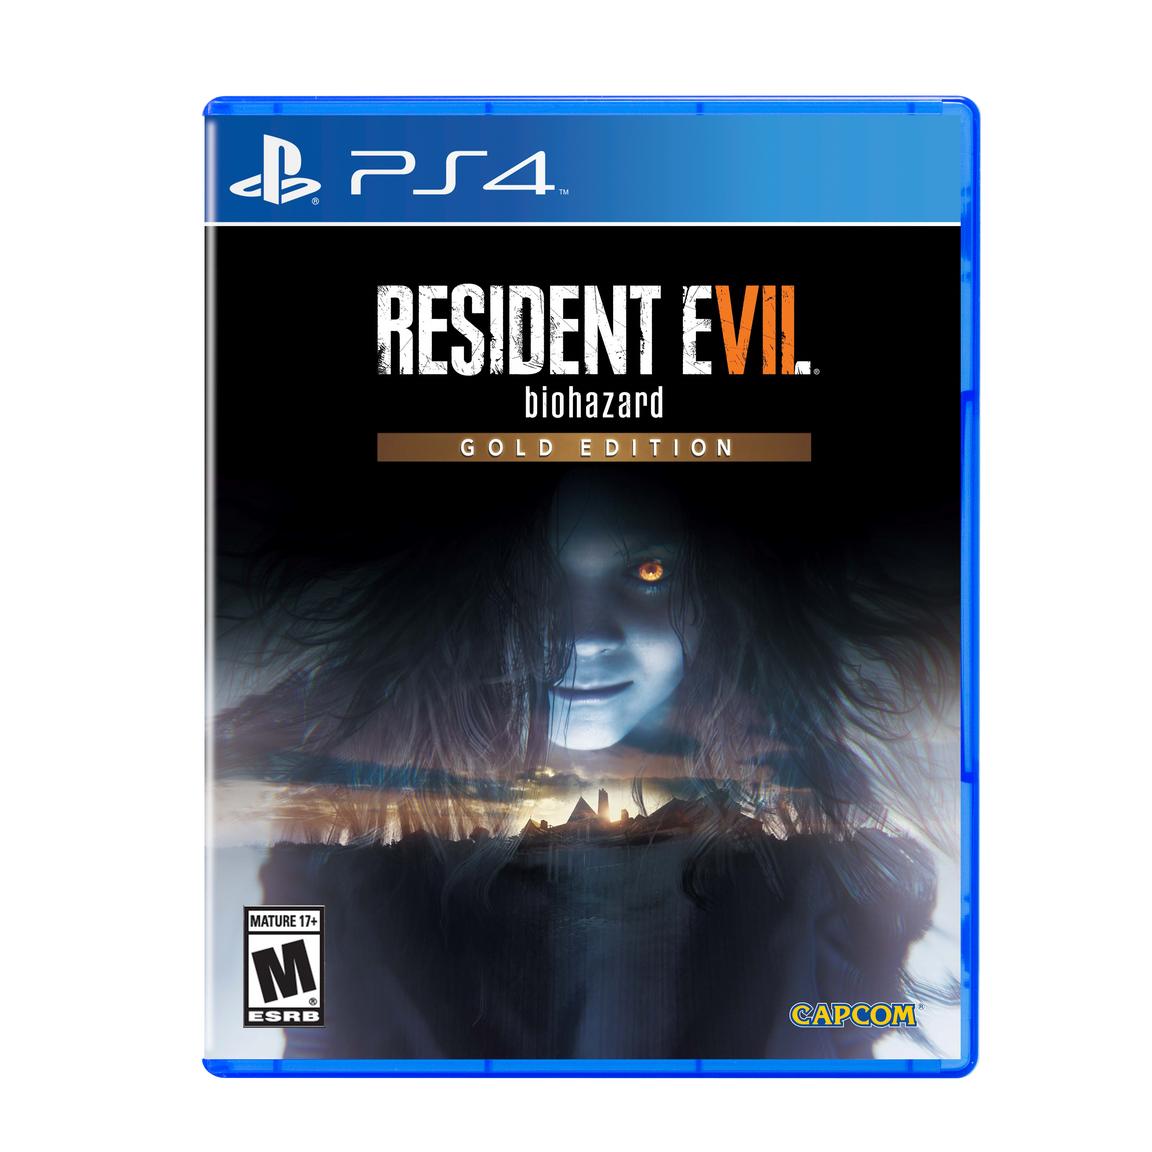 Resident Evil 7 Biohazard Gold Edition - PlayStation 4, Pre-Owned -  Capcom